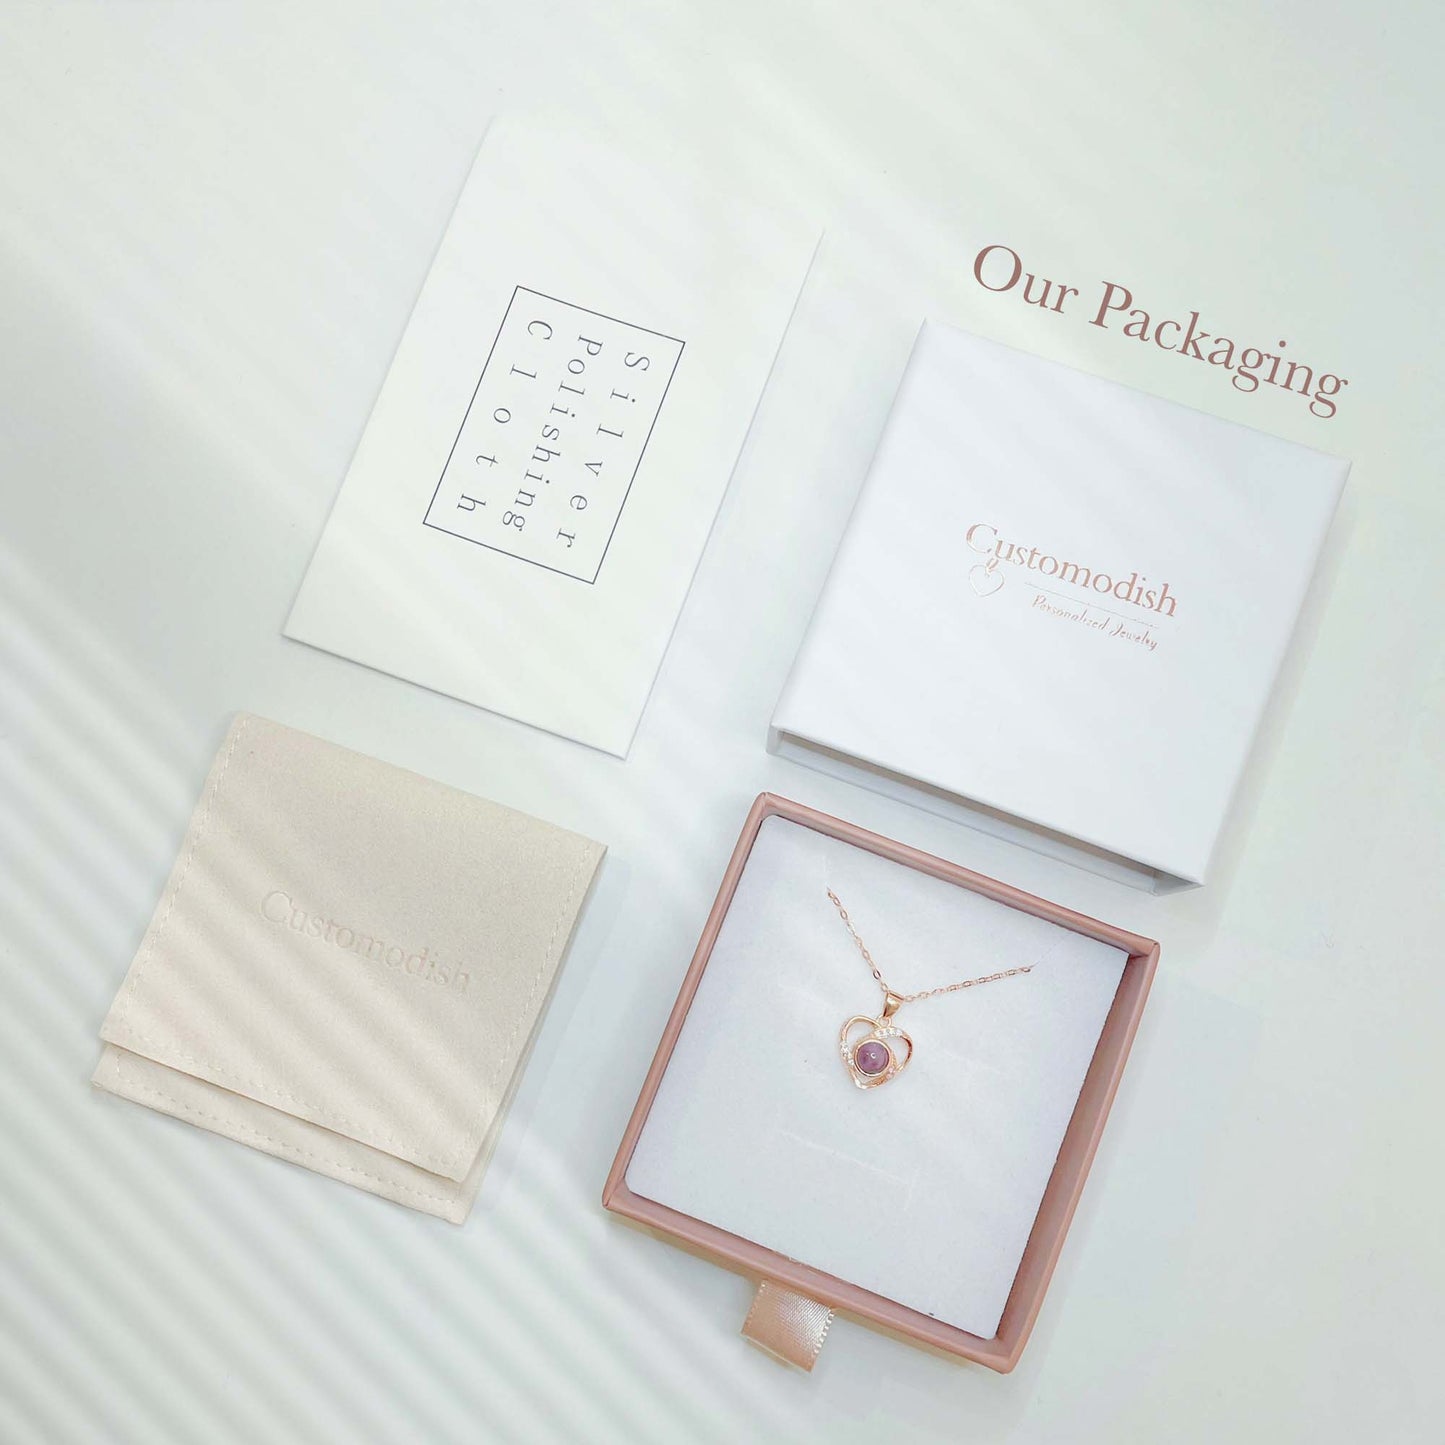 We offer free gift packing for all photo projection necklaces at Customodish.